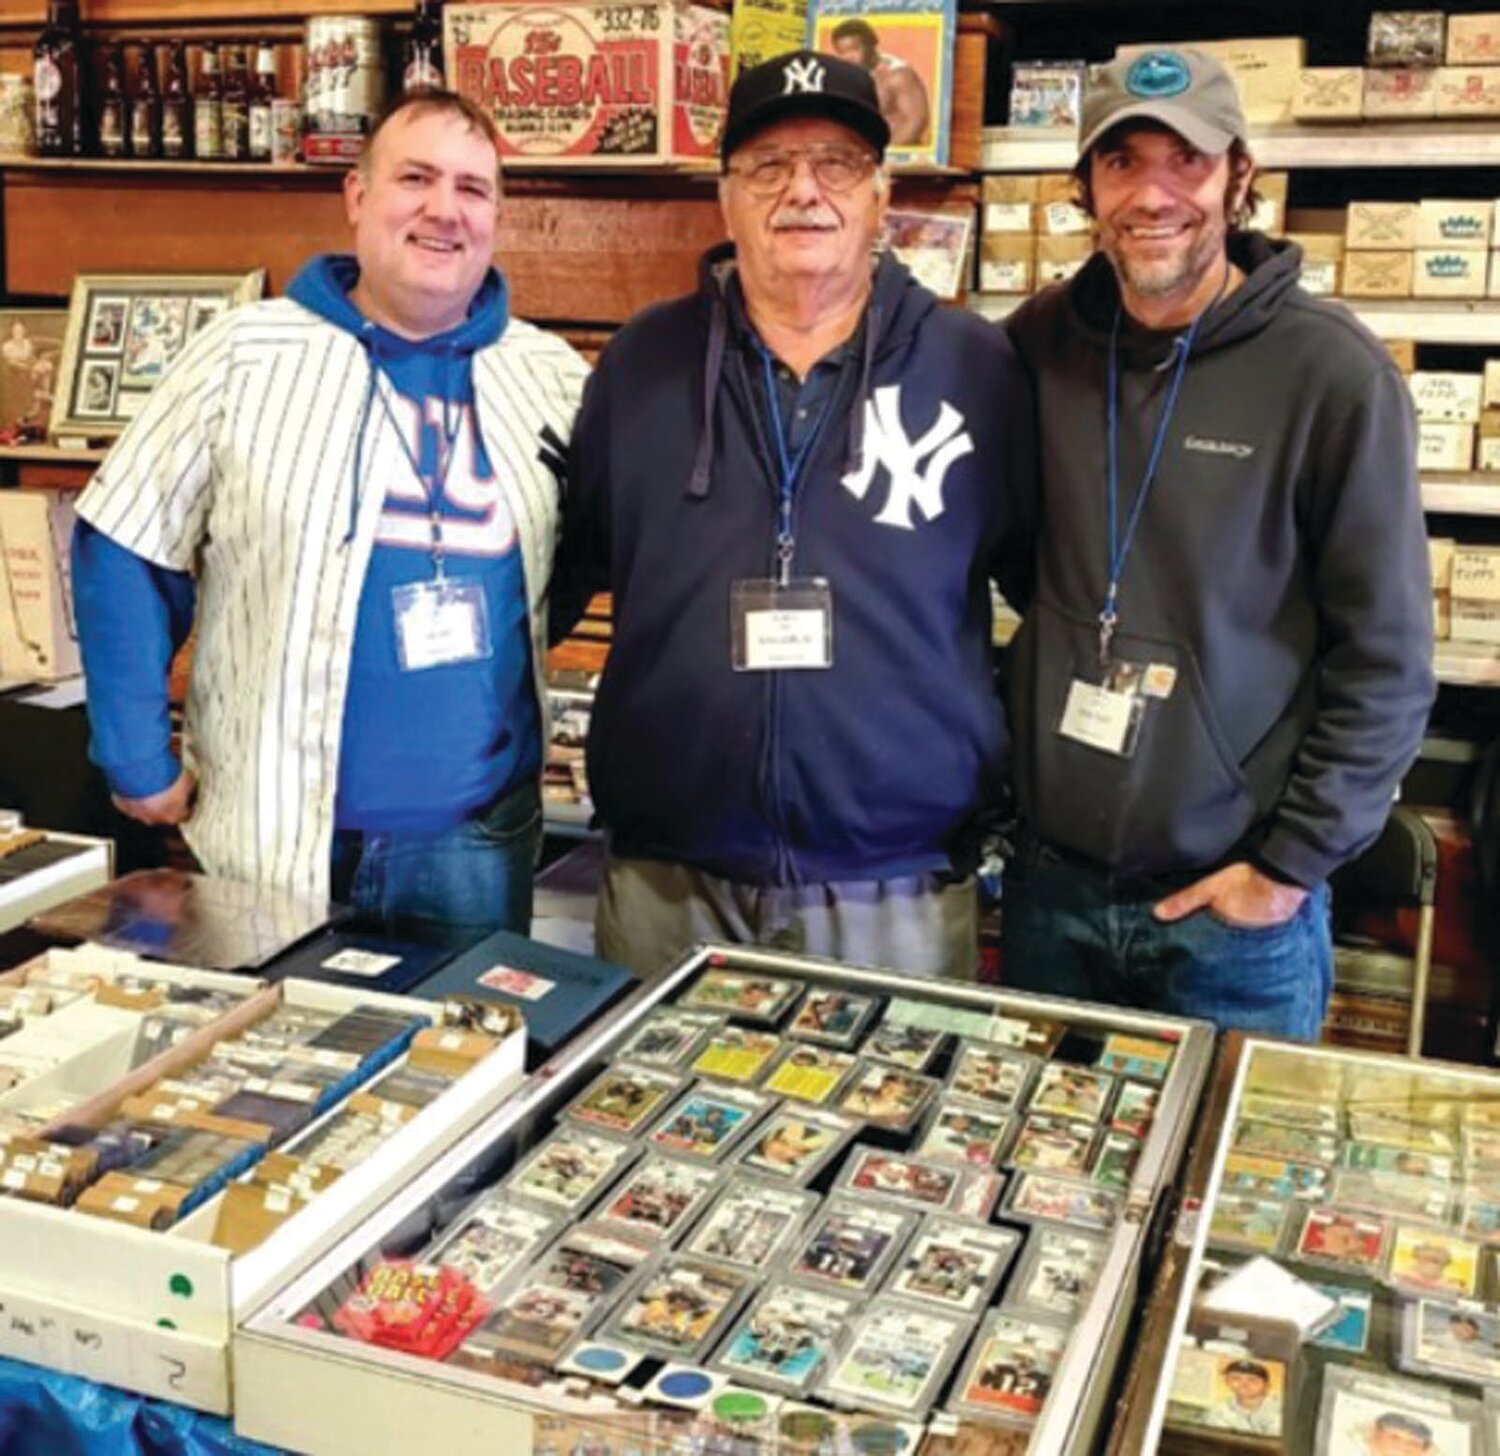 50 YEARS: Keeping the tradition alive at the Cranston Card Show is the Zolli family with Dad (John) and his sons Jay (left) and Mike (right). (Submitted photo)